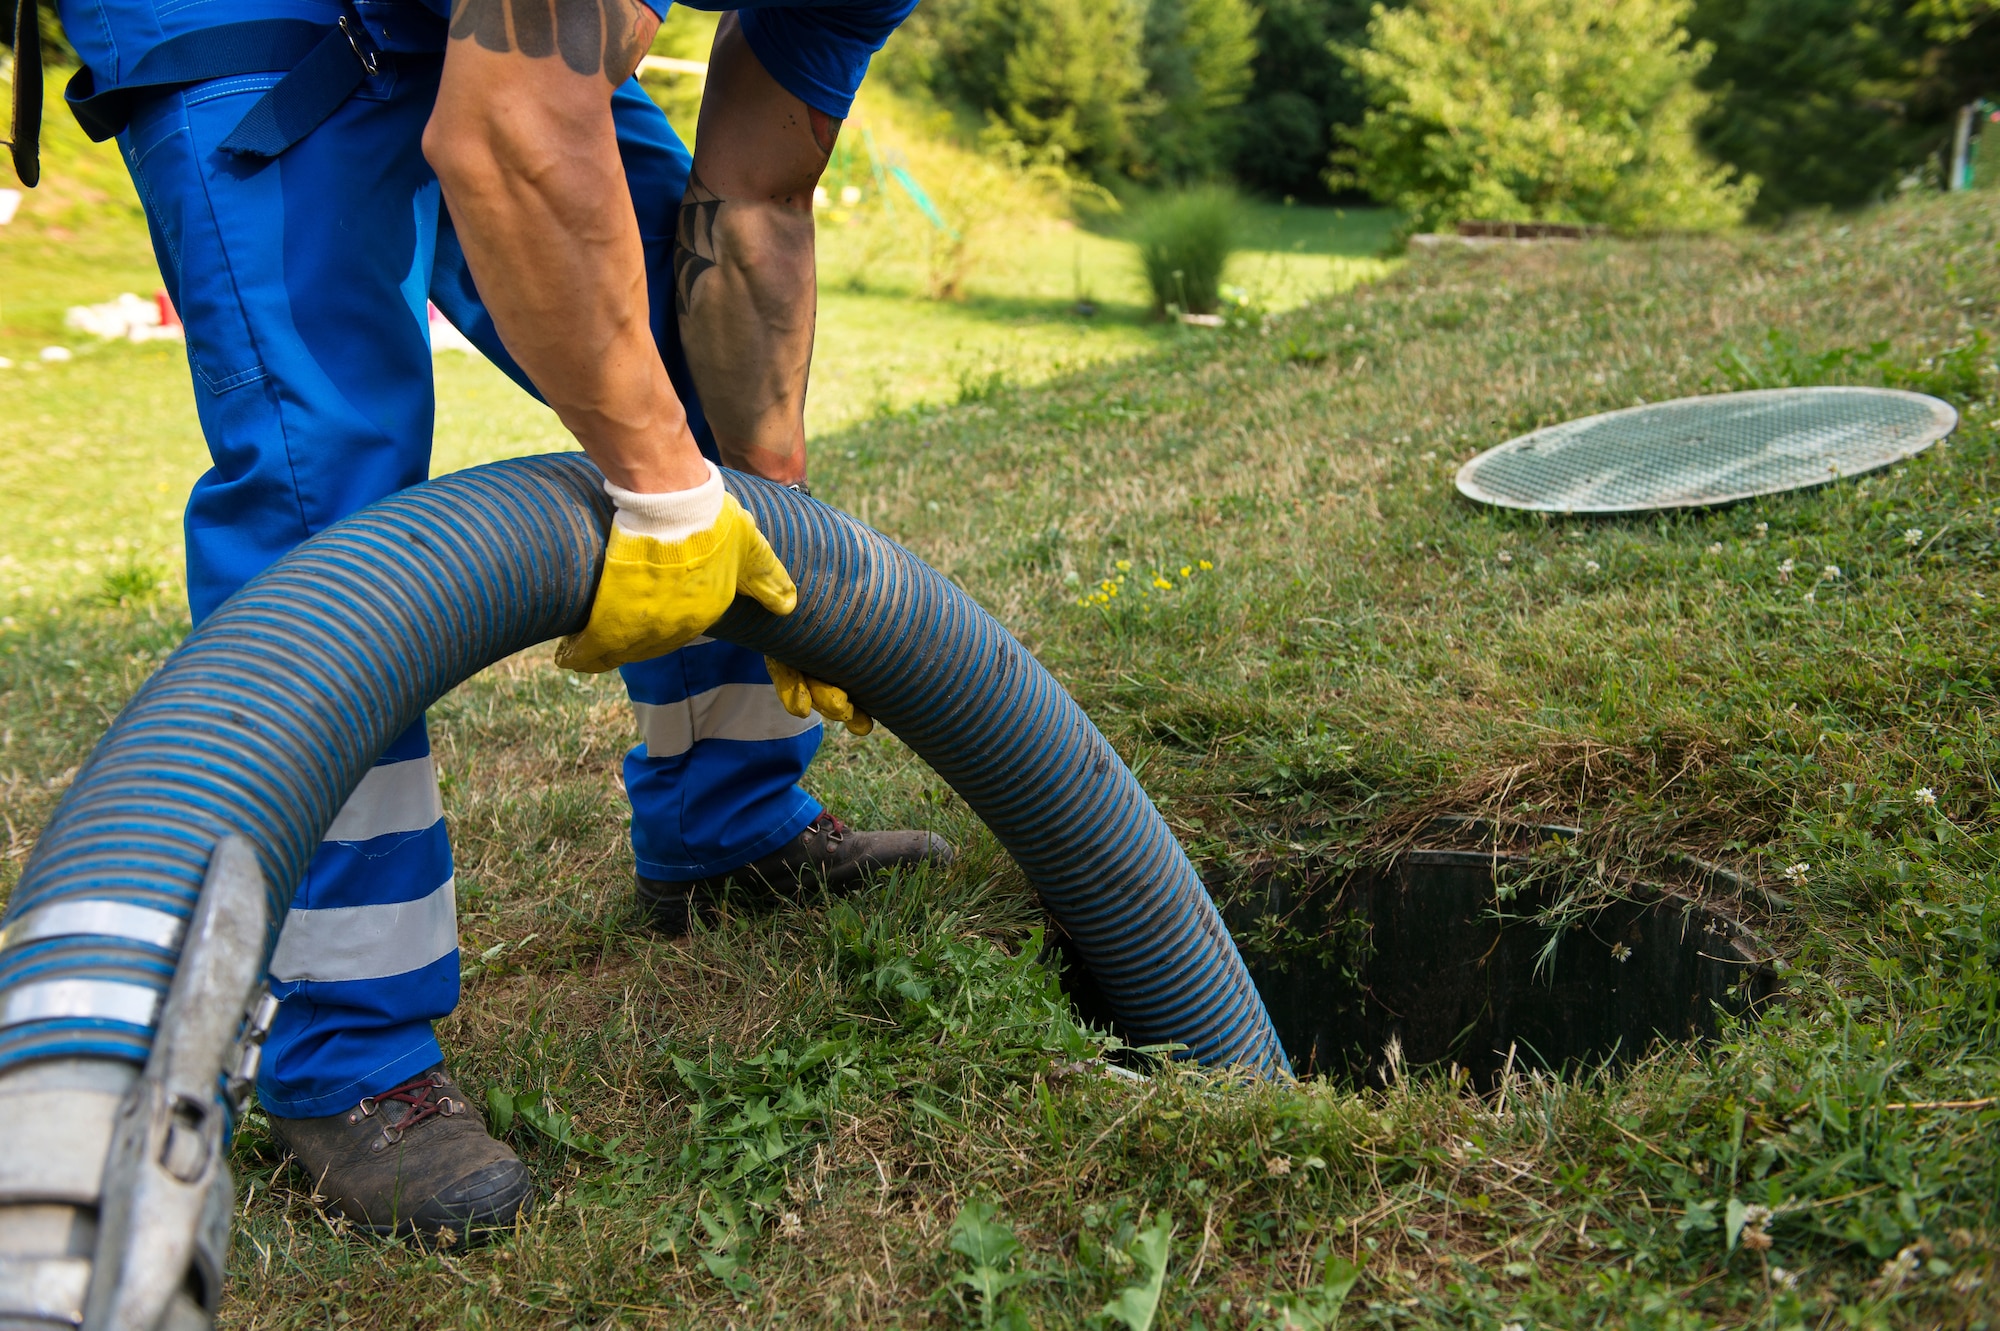 Stormwater Straight Talk: Maintaining septic systems